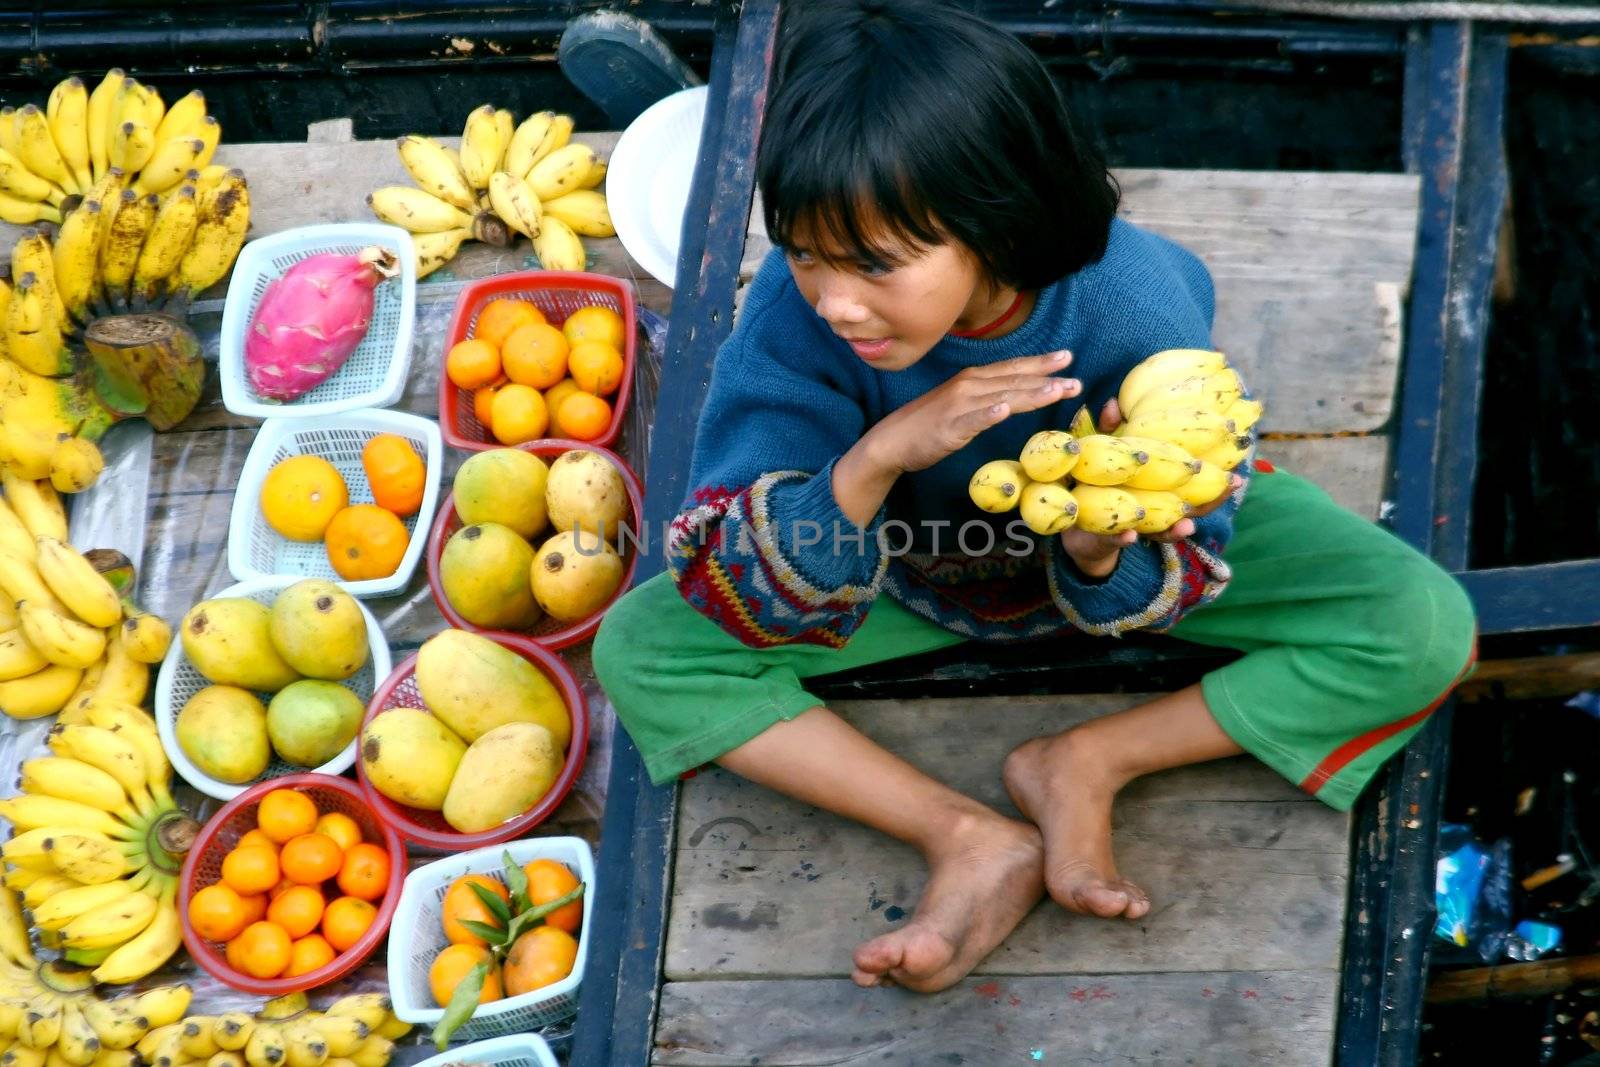 some fruits and youn boy on boat - vietnam